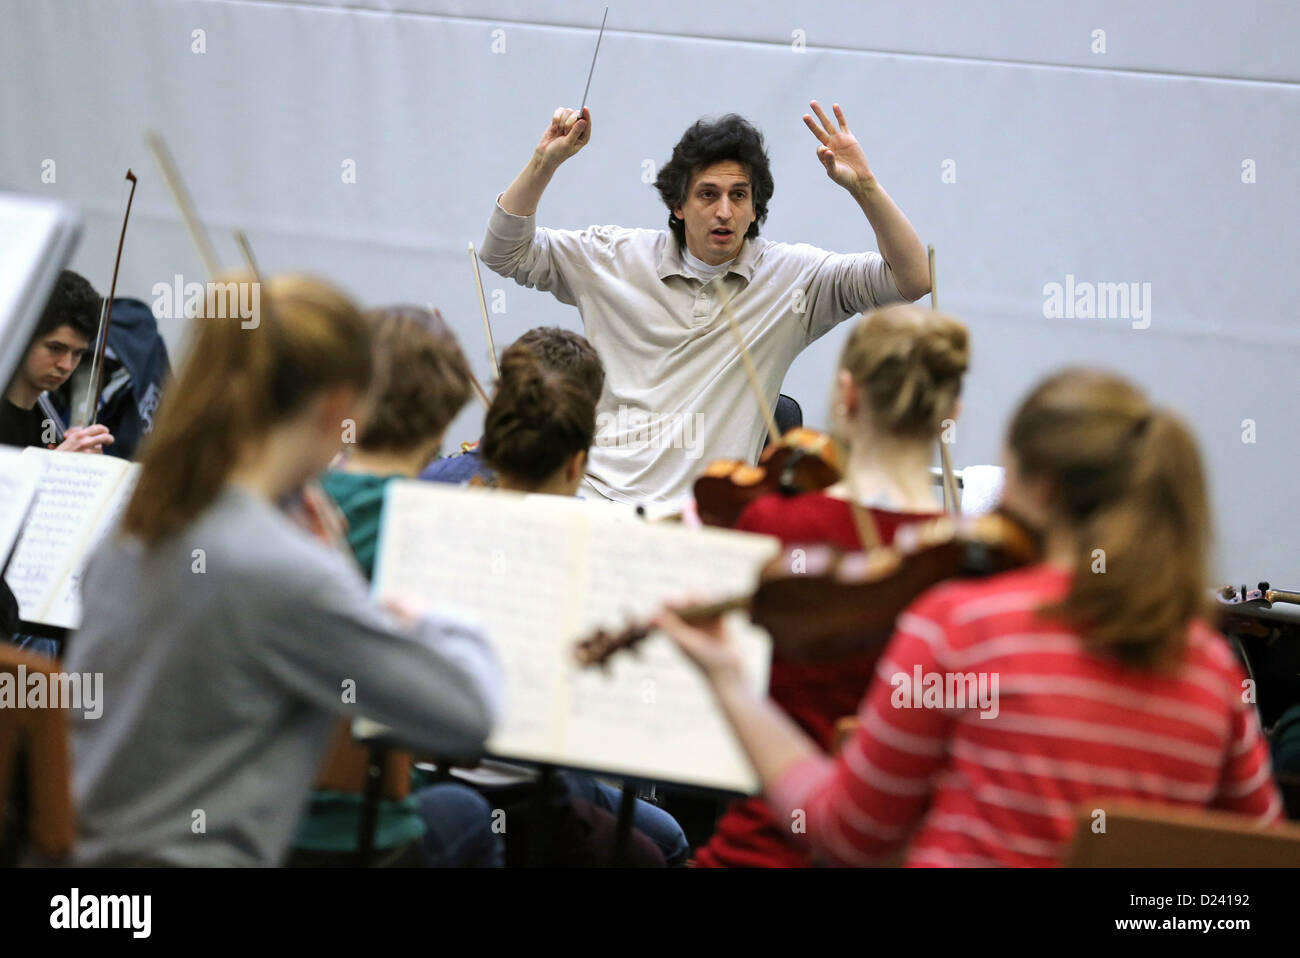 Principle conductor of Dresden's philharmonic orchestra Michael Sanderling rehearses with the federal youth orchestra in Colditz, Germany, 7 January 2013. He will tour with them through Germany and Europa on 10 January 2013. Photo: Jan Woitas Stock Photo